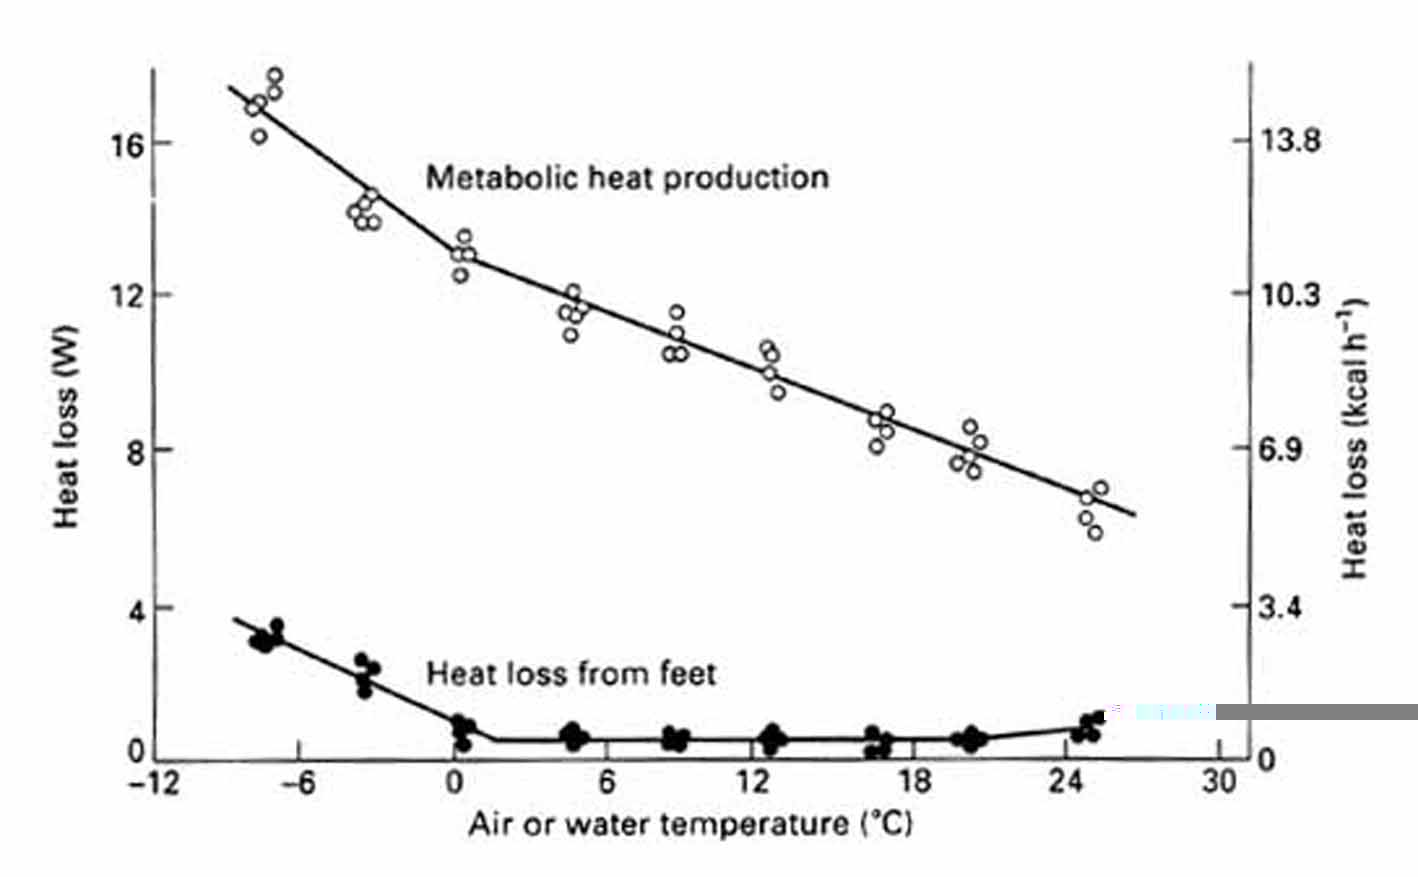 Graph showing relationship between air or water temperature and heat loss from a bird's foot